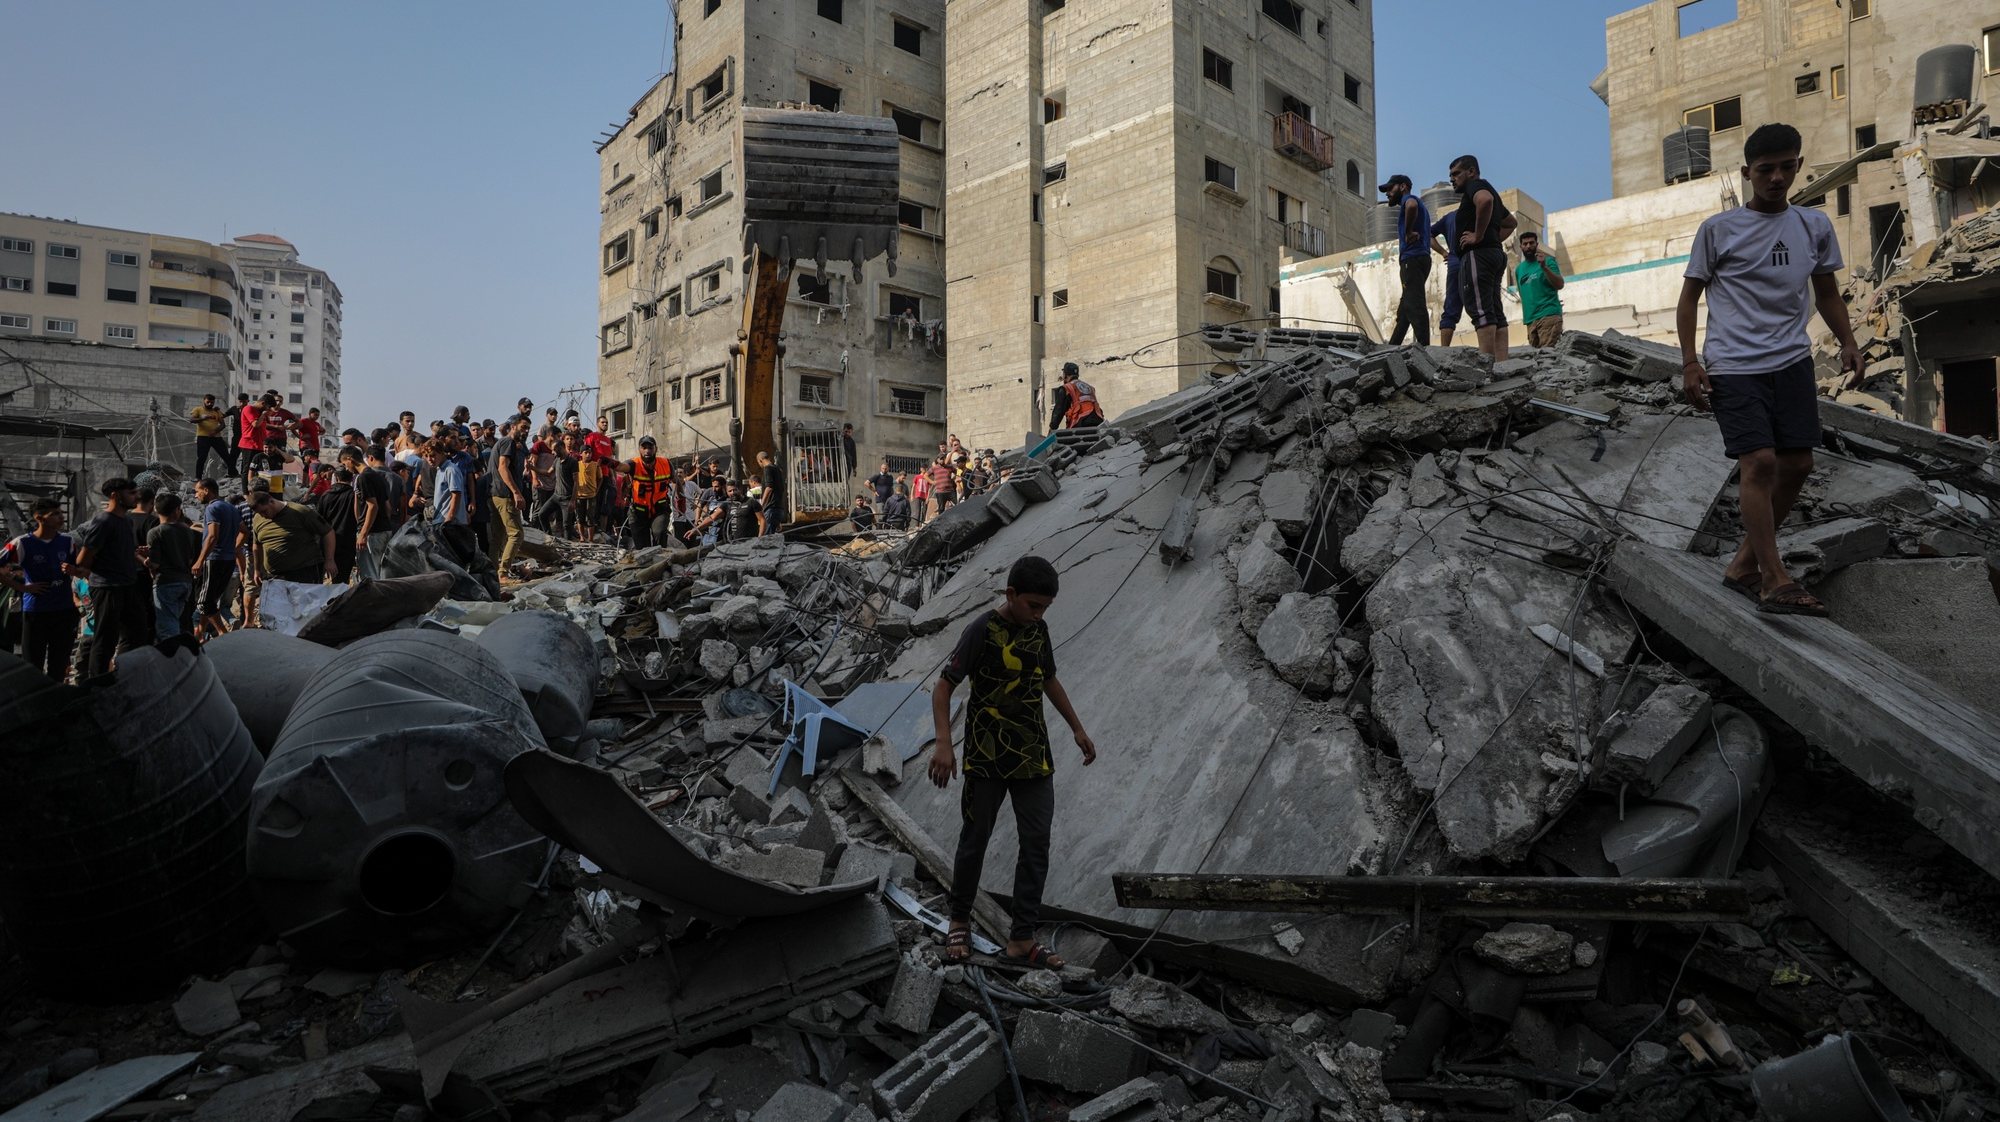 epa10935862 Palestinians search among the rubble of the destroyed Al Faseih family house following an airstrike in the Al Shatea refugee camp, Gaza, 24 October 2023. More than 20 members from the Al Faseih family were killed following an airstrike the previous night. More than 5,000 Palestinians and 1,400 Israelis have been killed, according to the Israel Defense Forces (IDF) and the Palestinian health authority, since Hamas militants launched an attack against Israel from the Gaza Strip on 07 October, and the Israeli airstrikes which followed.  EPA/MOHAMMED SABER